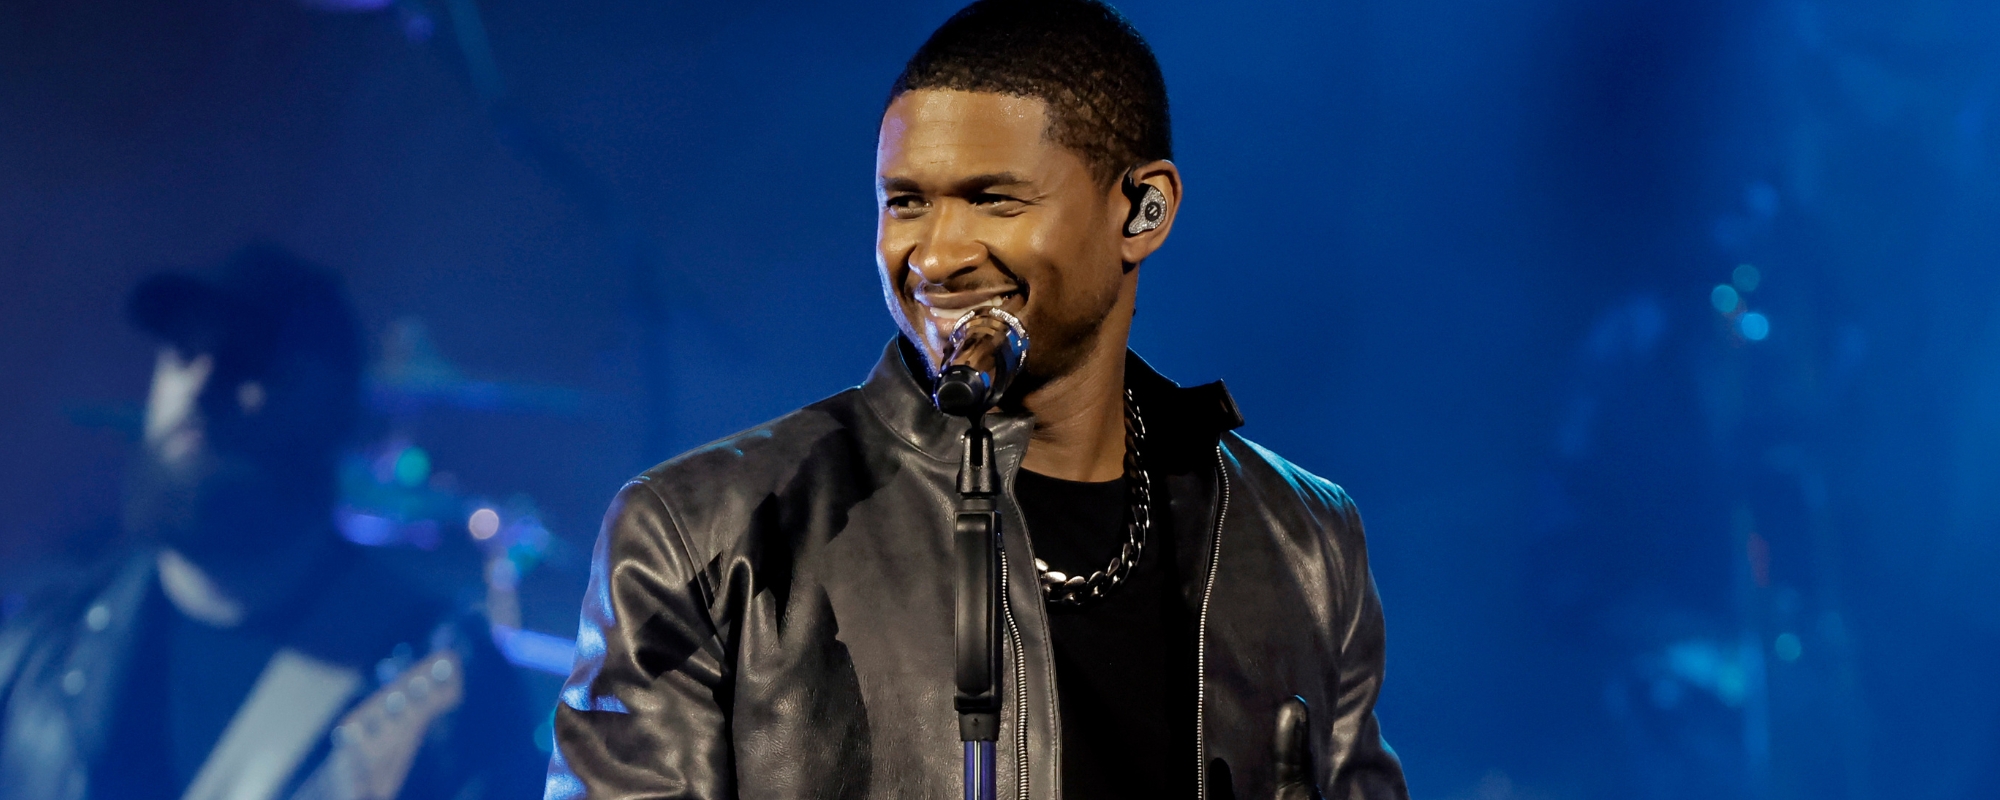 The Love Triangle Story Behind “You Make Me Wanna…” by Usher